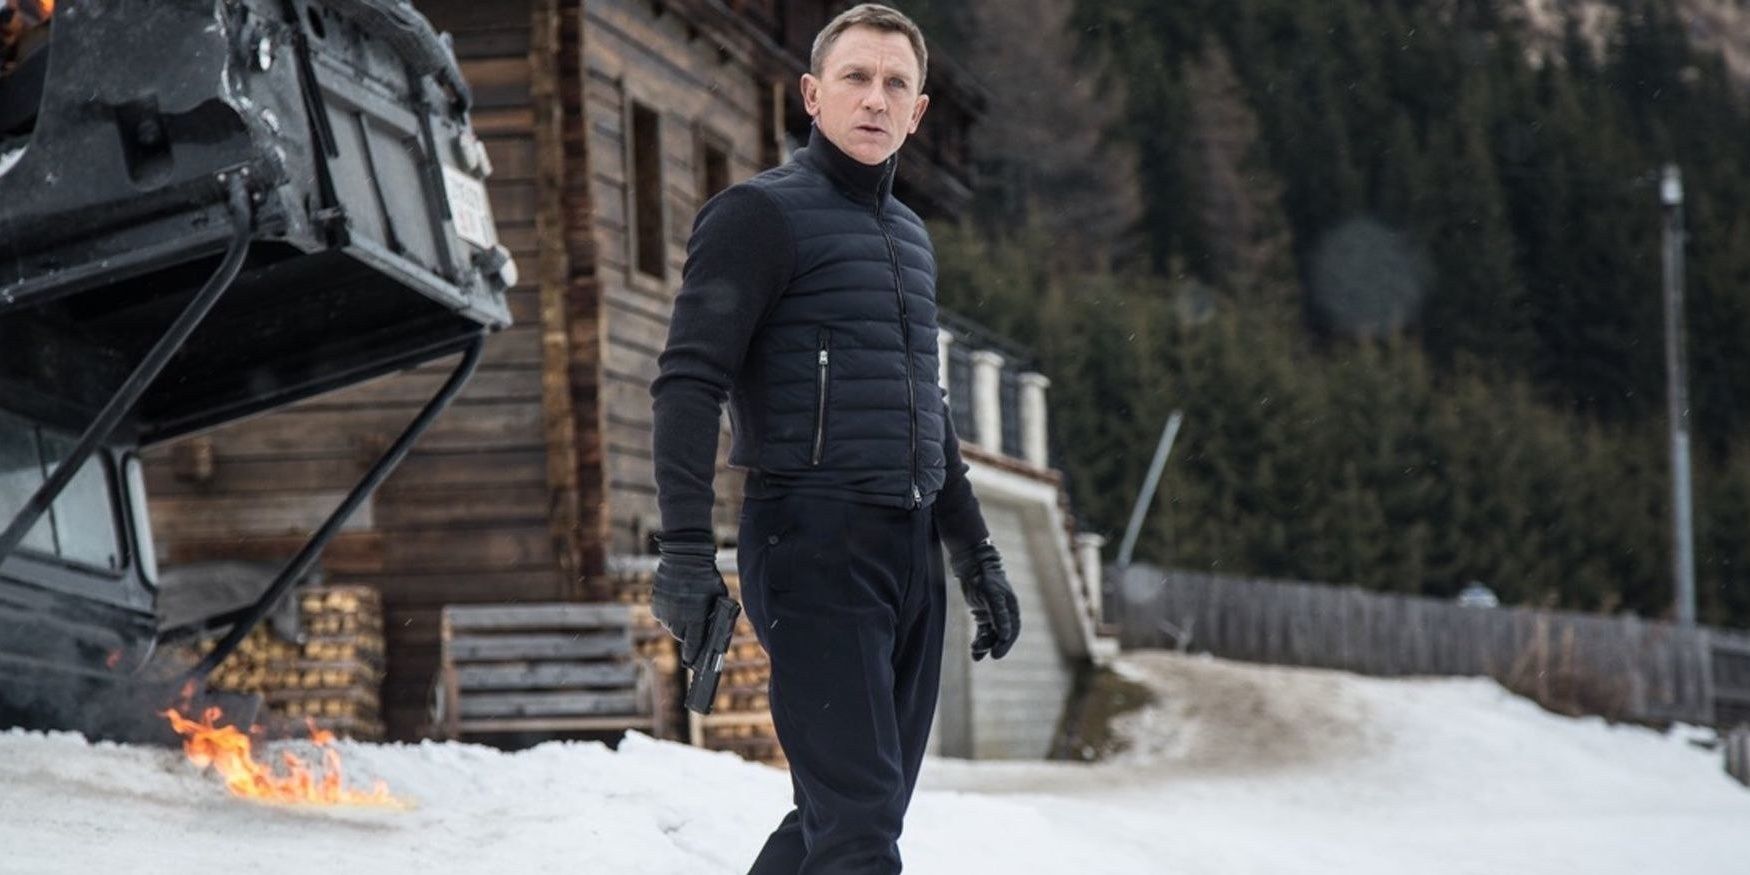 James Bond standing in the snow, holding a gun in Spectre